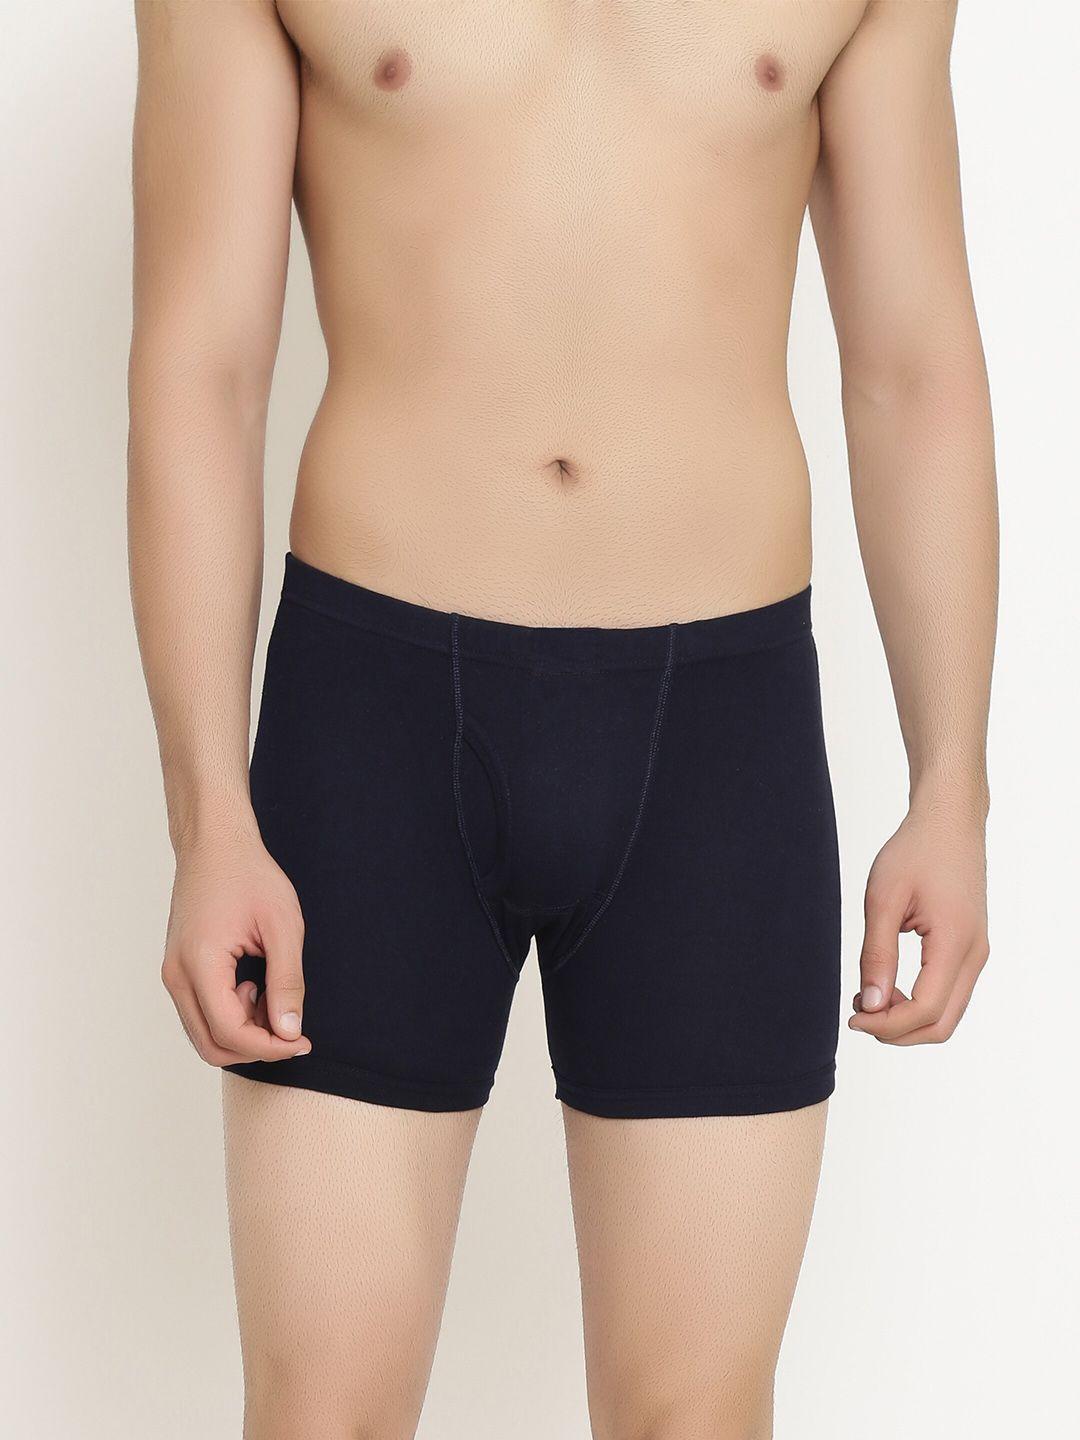 the roadster lifestyle co. navy blue mid rise breathable cotton trunk rtie-1004-nb-1